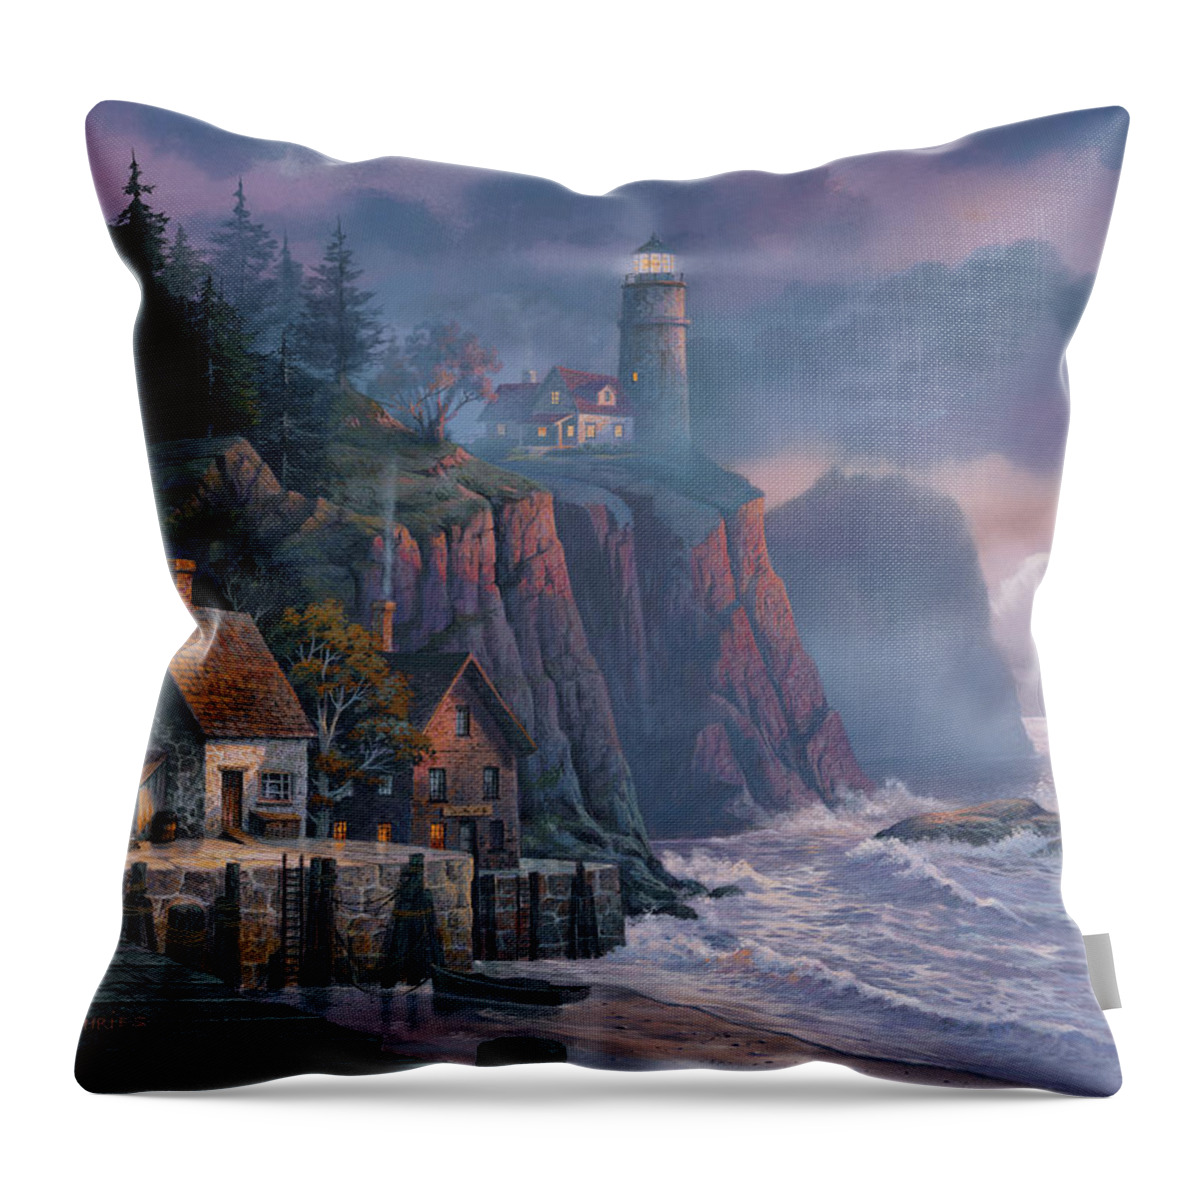 #faatoppicks Throw Pillow featuring the painting Harbor Light Hideaway by Michael Humphries